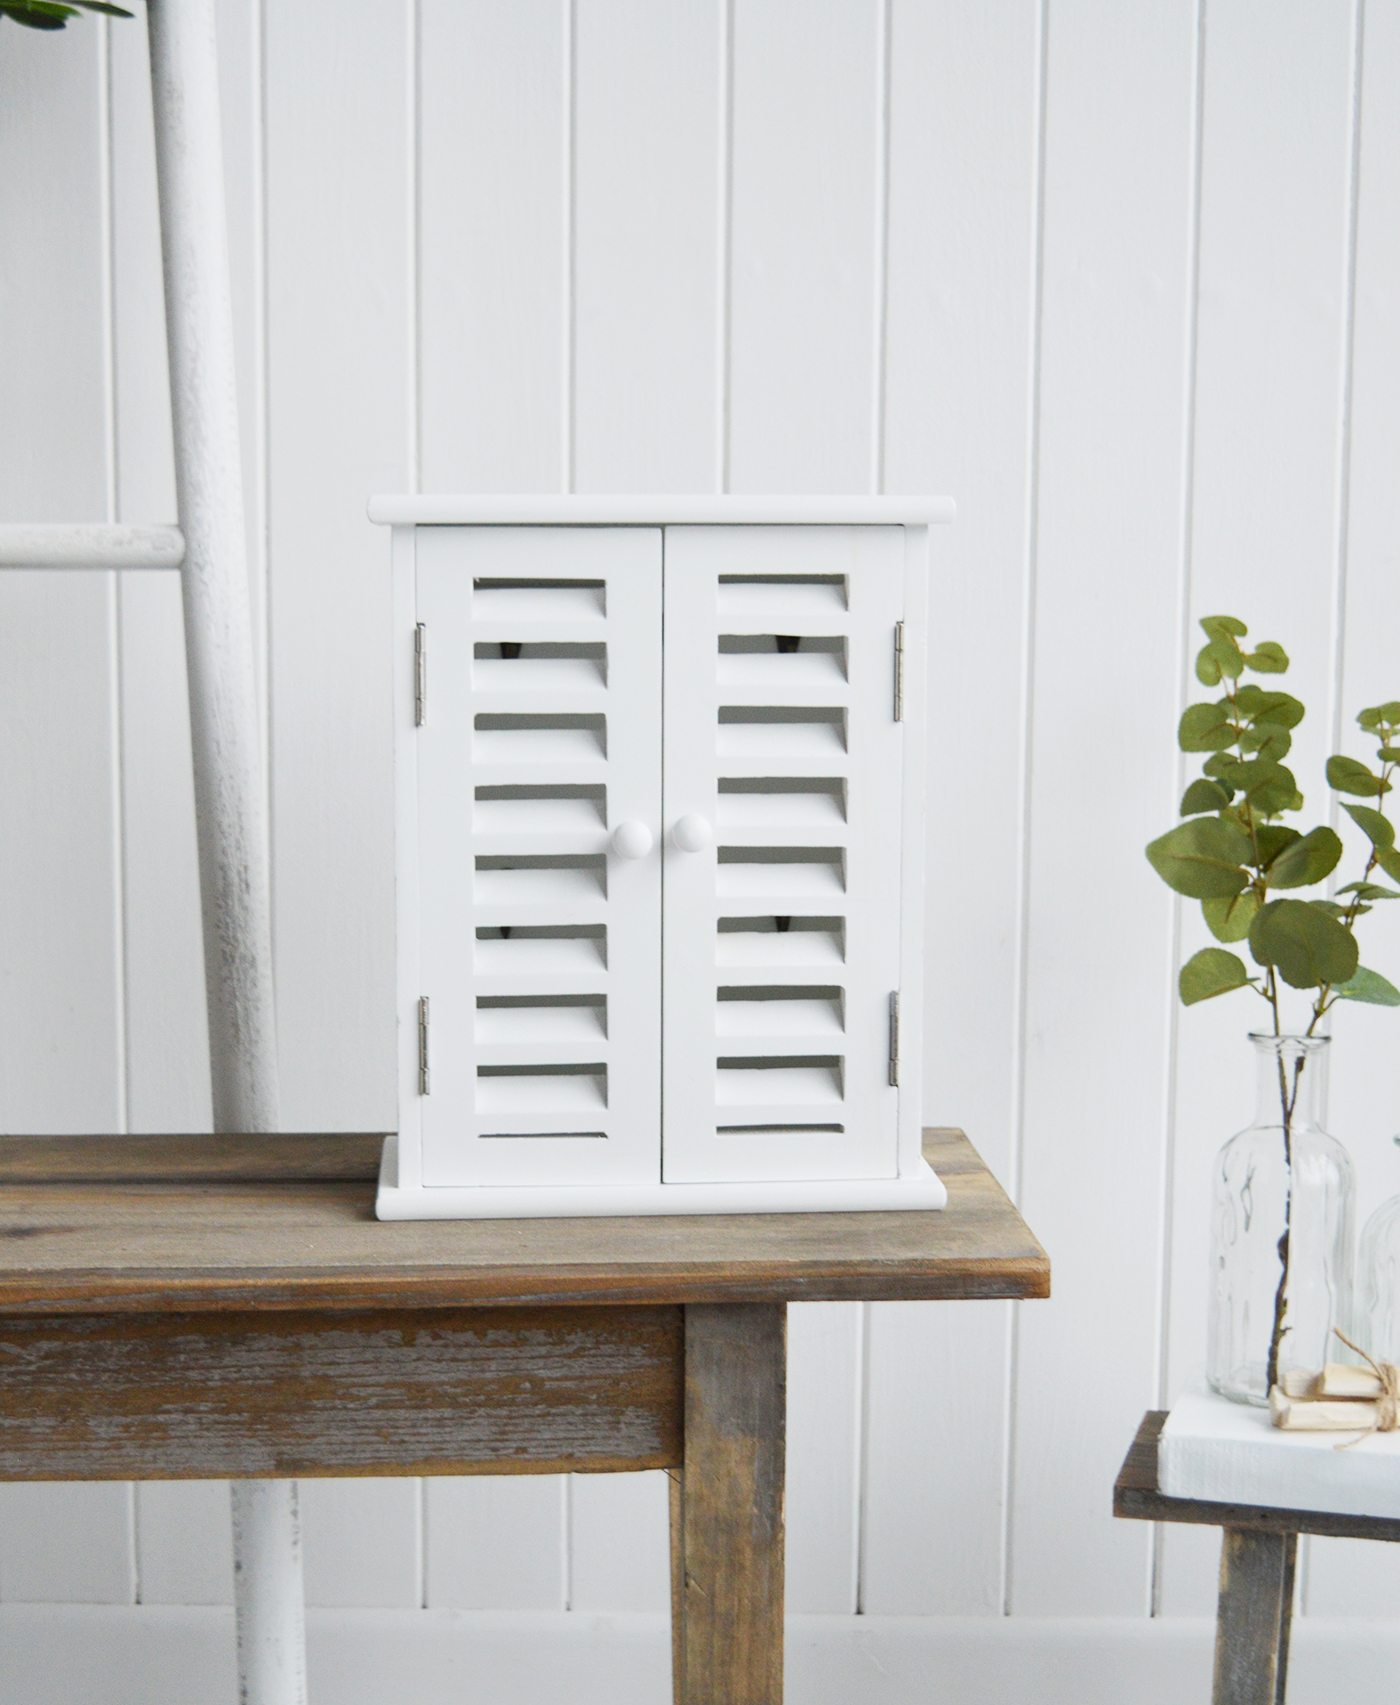 White Key Cupboard for white interiors and furniture in New England styled homes in the country, by the coast or in the city